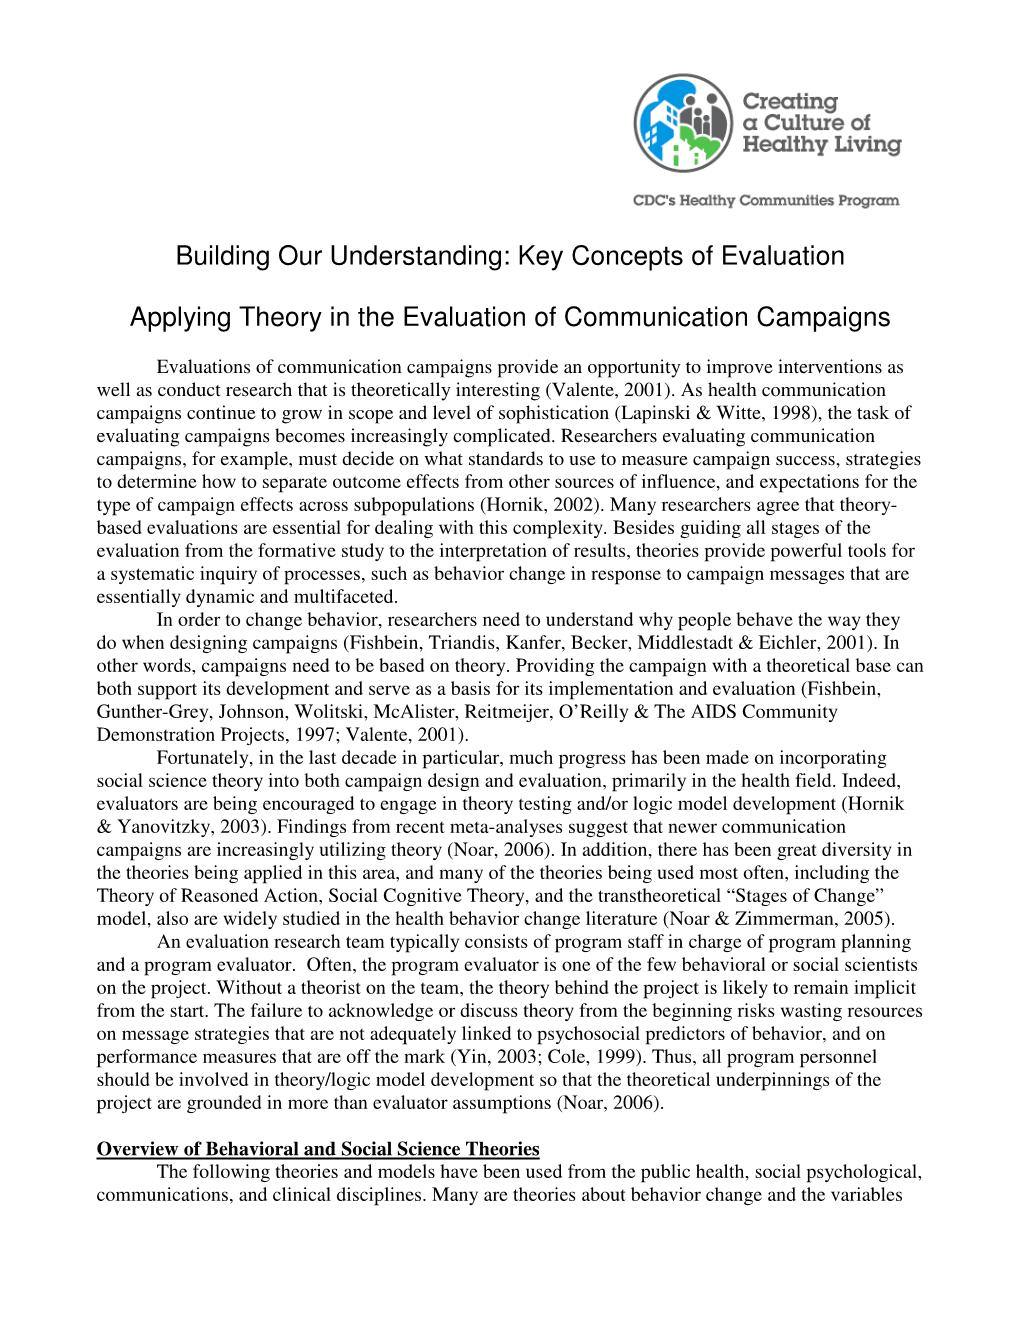 Applying Theory in the Evaluation of Communication Campaigns